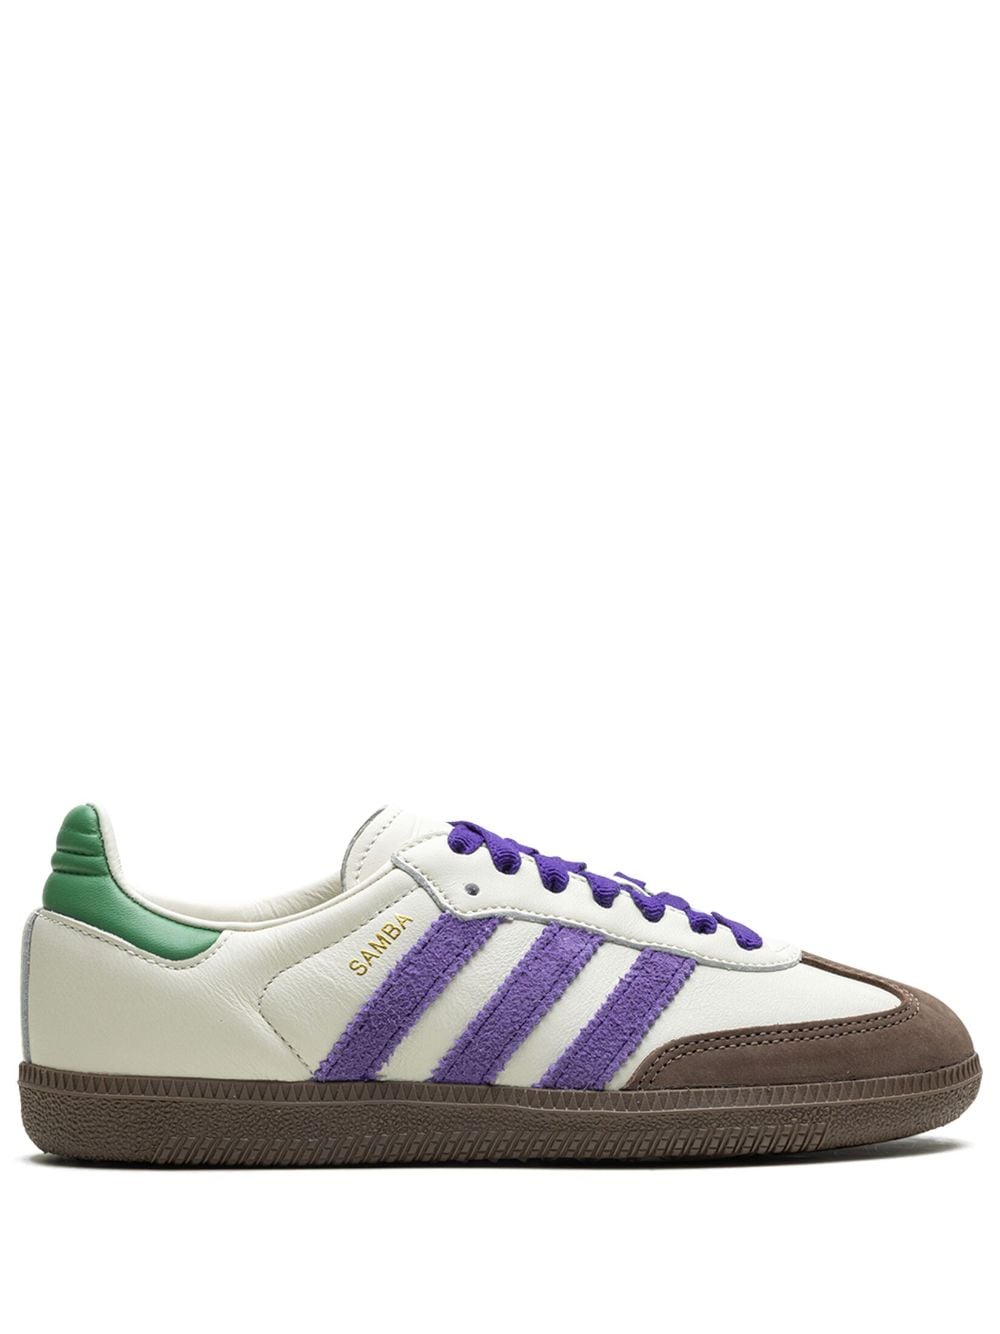 Shop Adidas Originals Samba Og Leather Sneakers In White